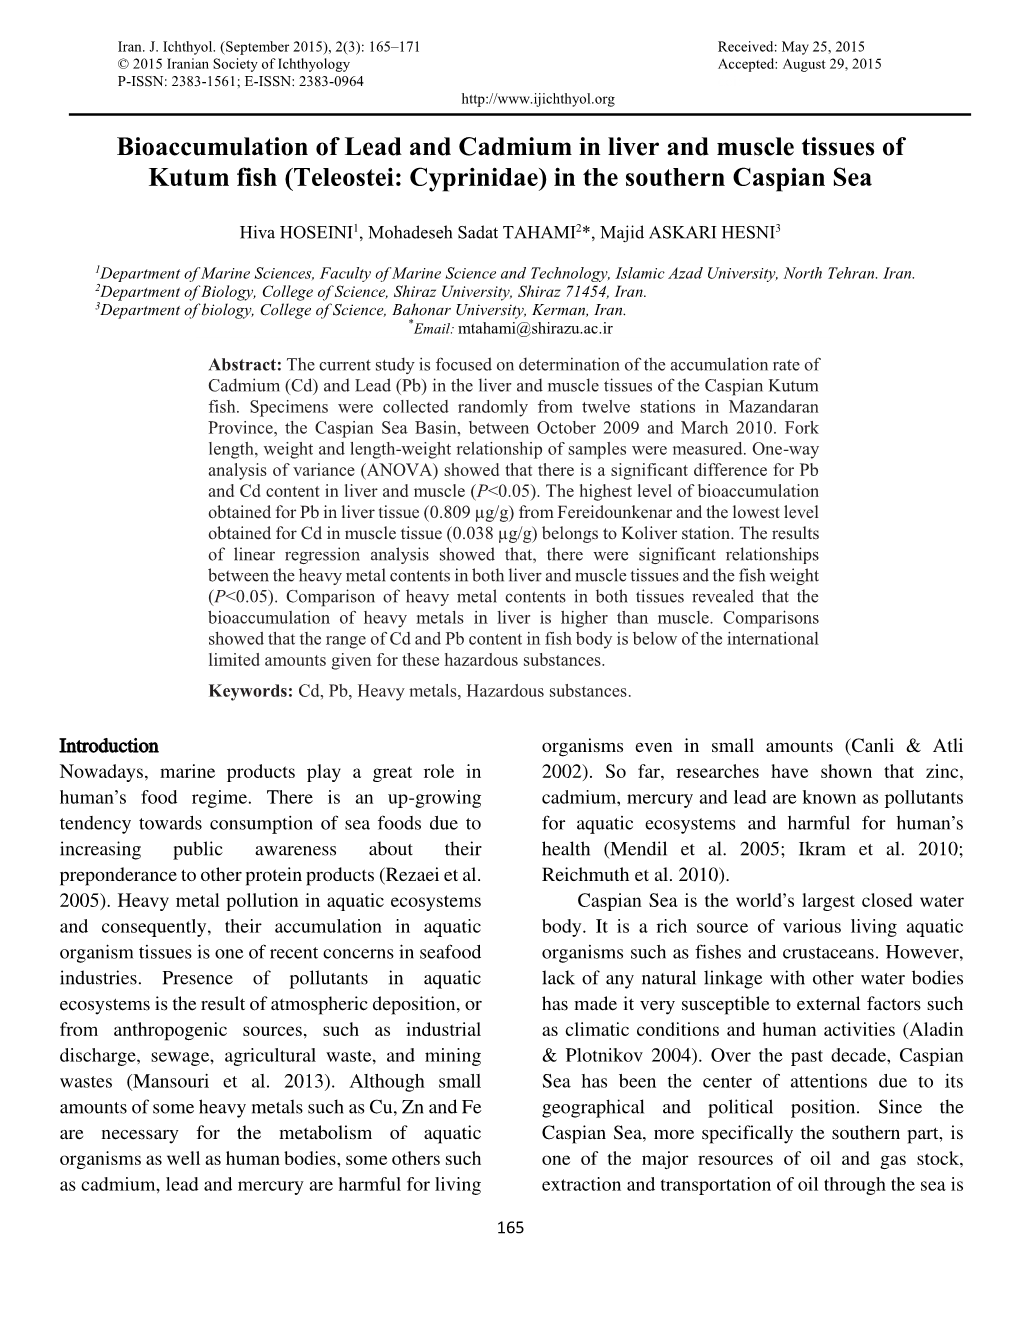 Bioaccumulation of Lead and Cadmium in Liver and Muscle Tissues of Kutum Fish (Teleostei: Cyprinidae) in the Southern Caspian Sea